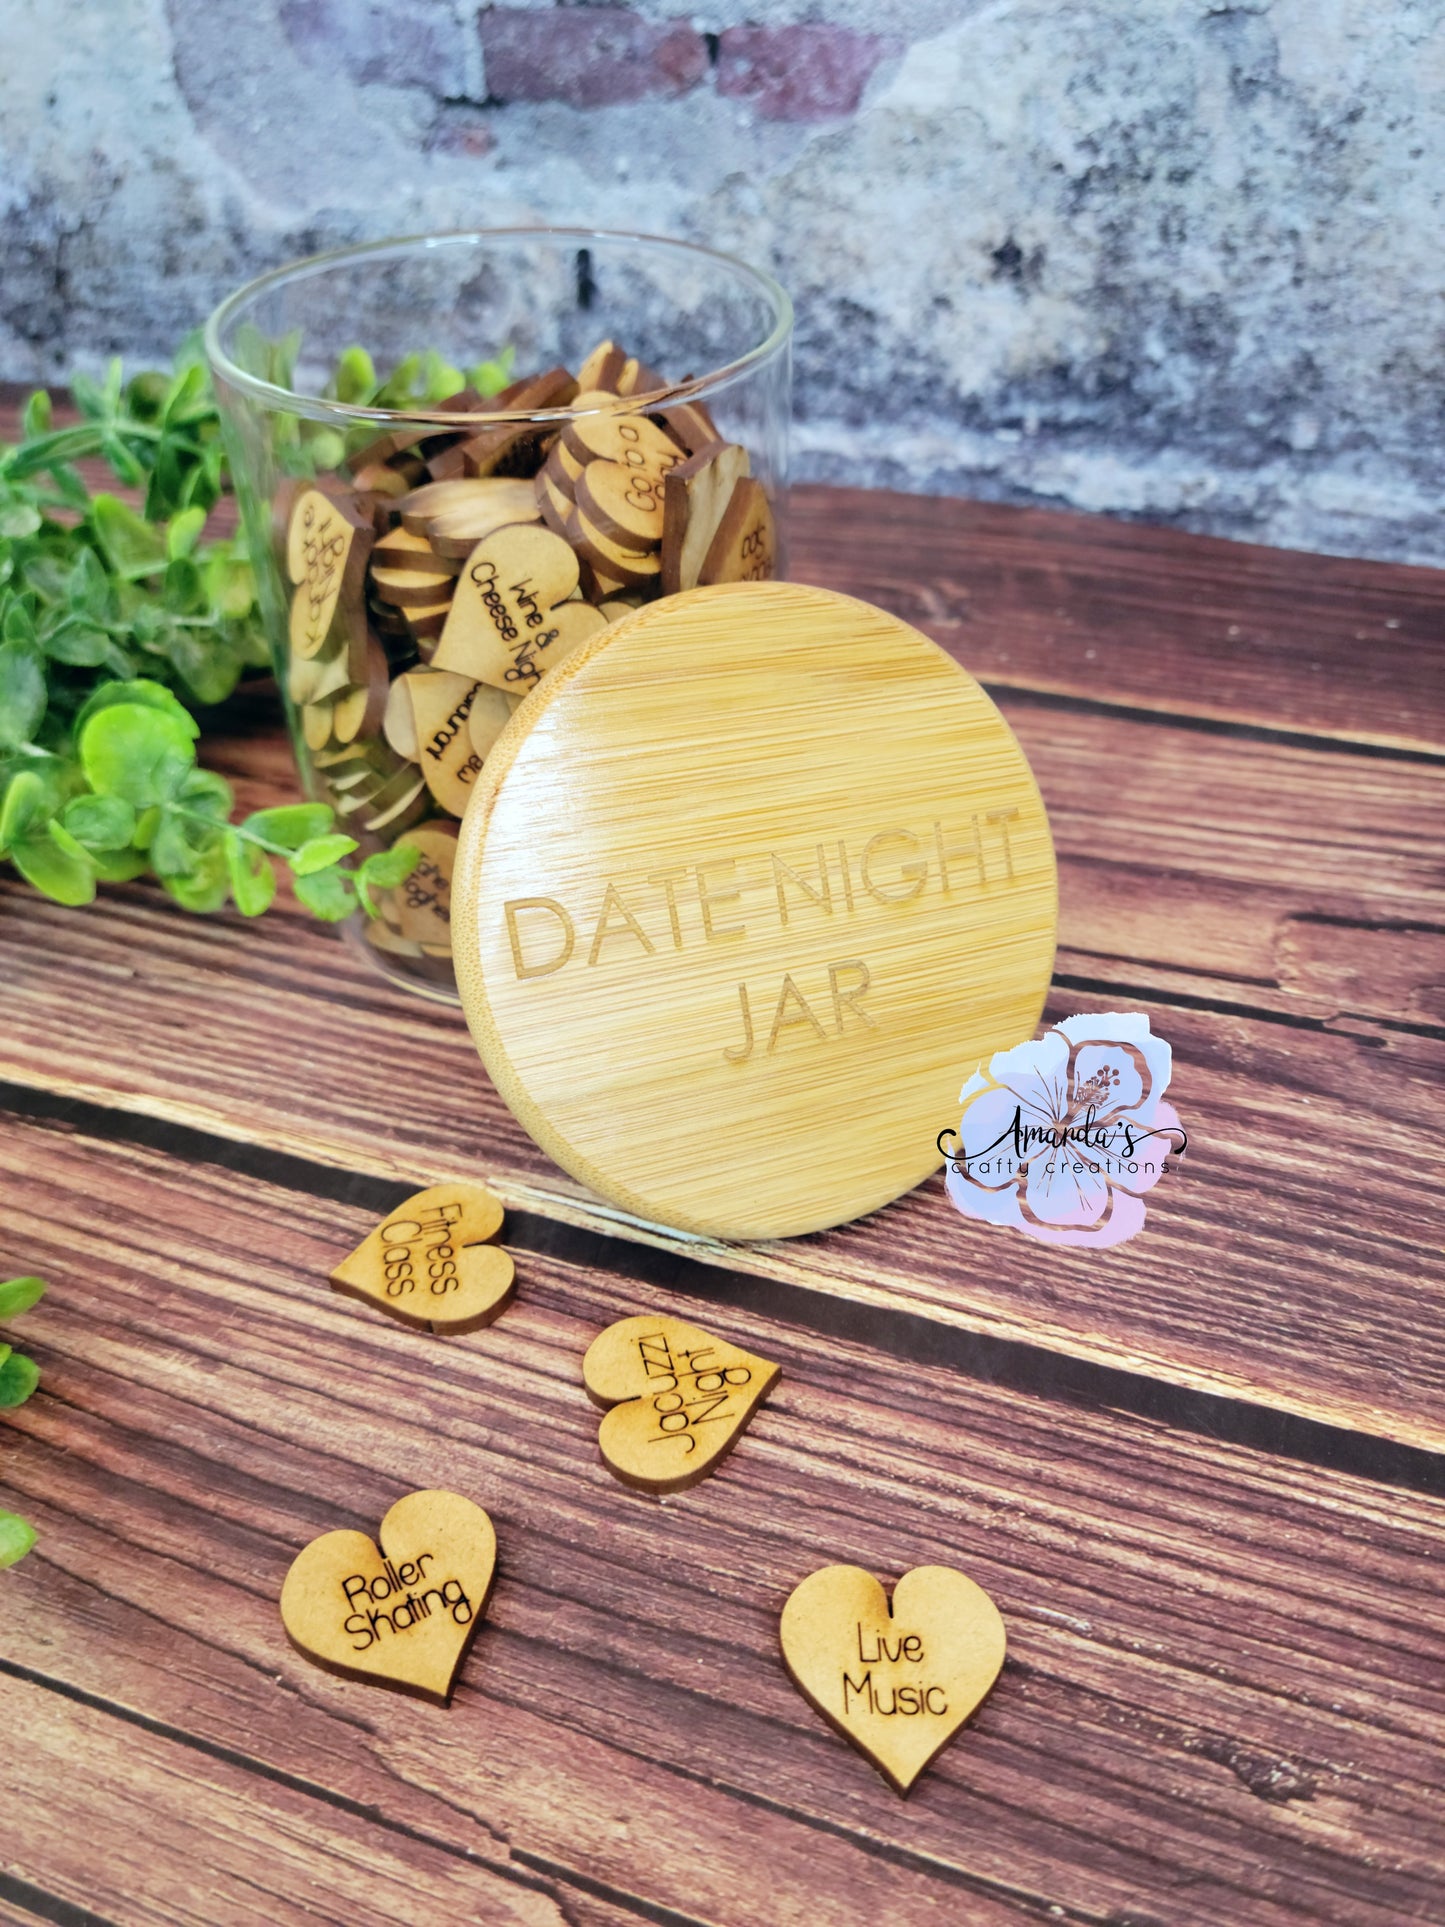 Date night jar with heart inserts